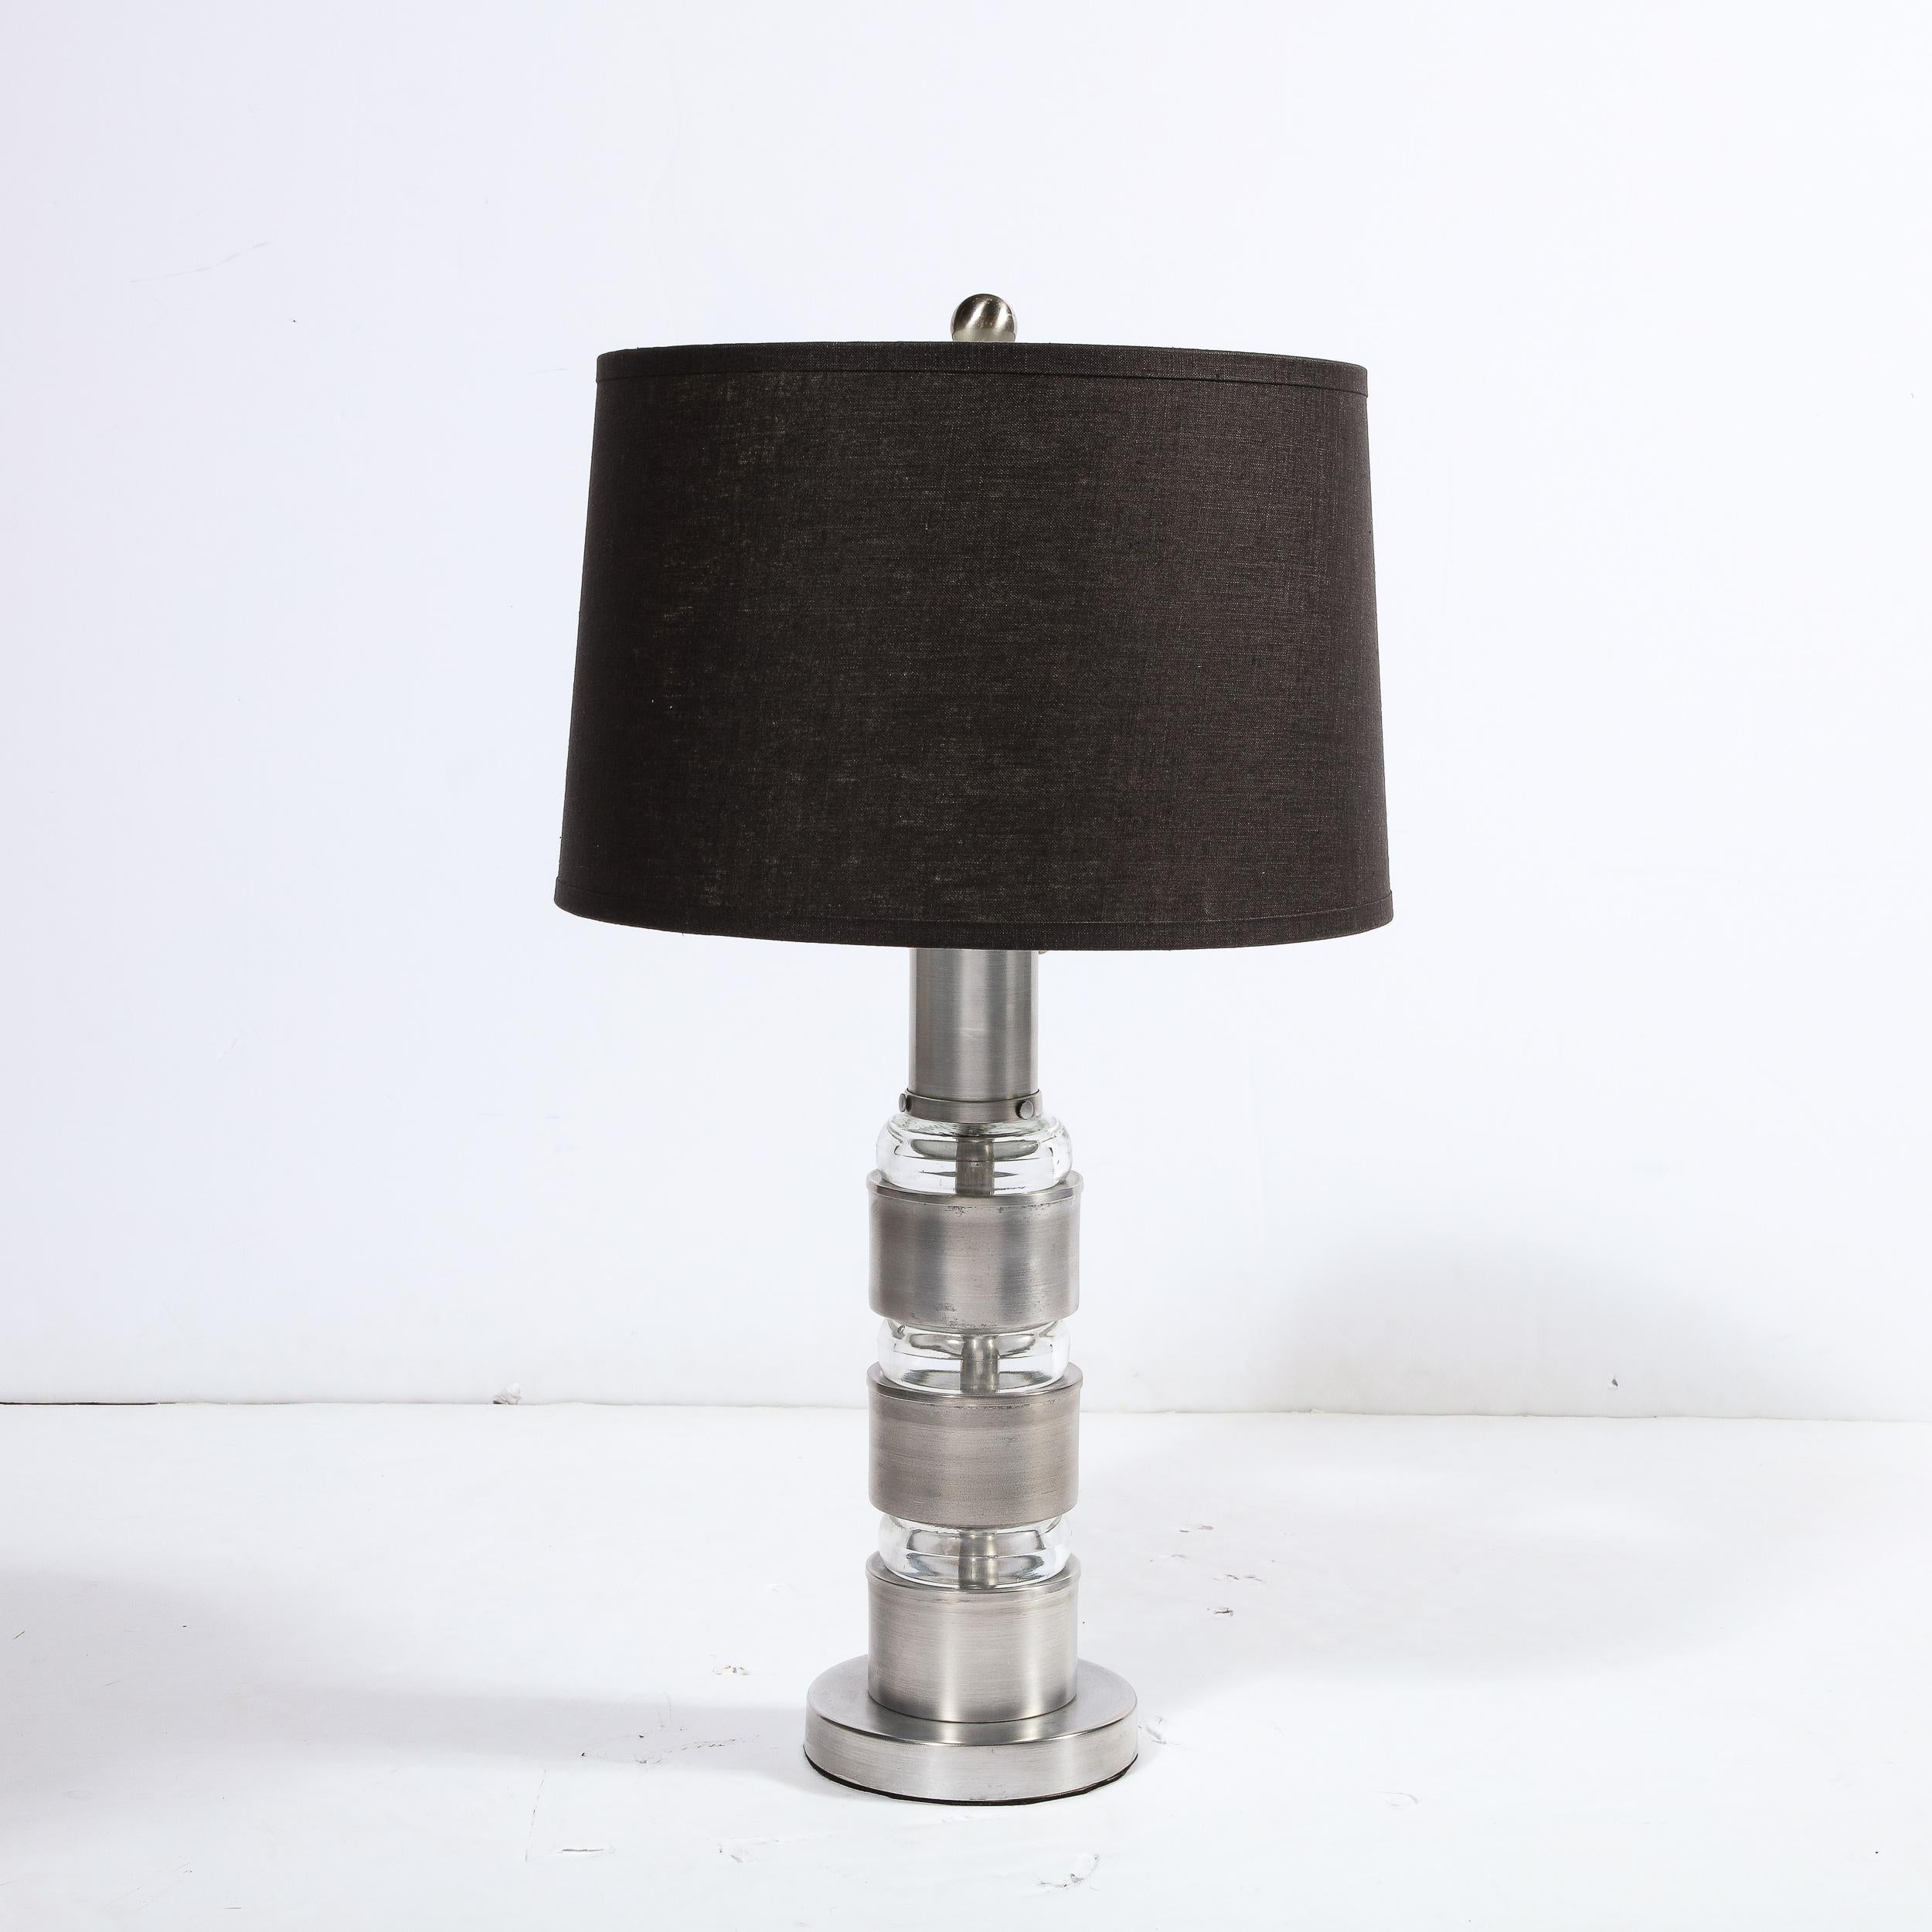 This refined pair of Art Deco Machine Age table lamps were realized by the fabled industrial Designer Russell Wright in the United States circa 1935. They feature circular volumetric bases in brushed aluminum from which the body of each lamp